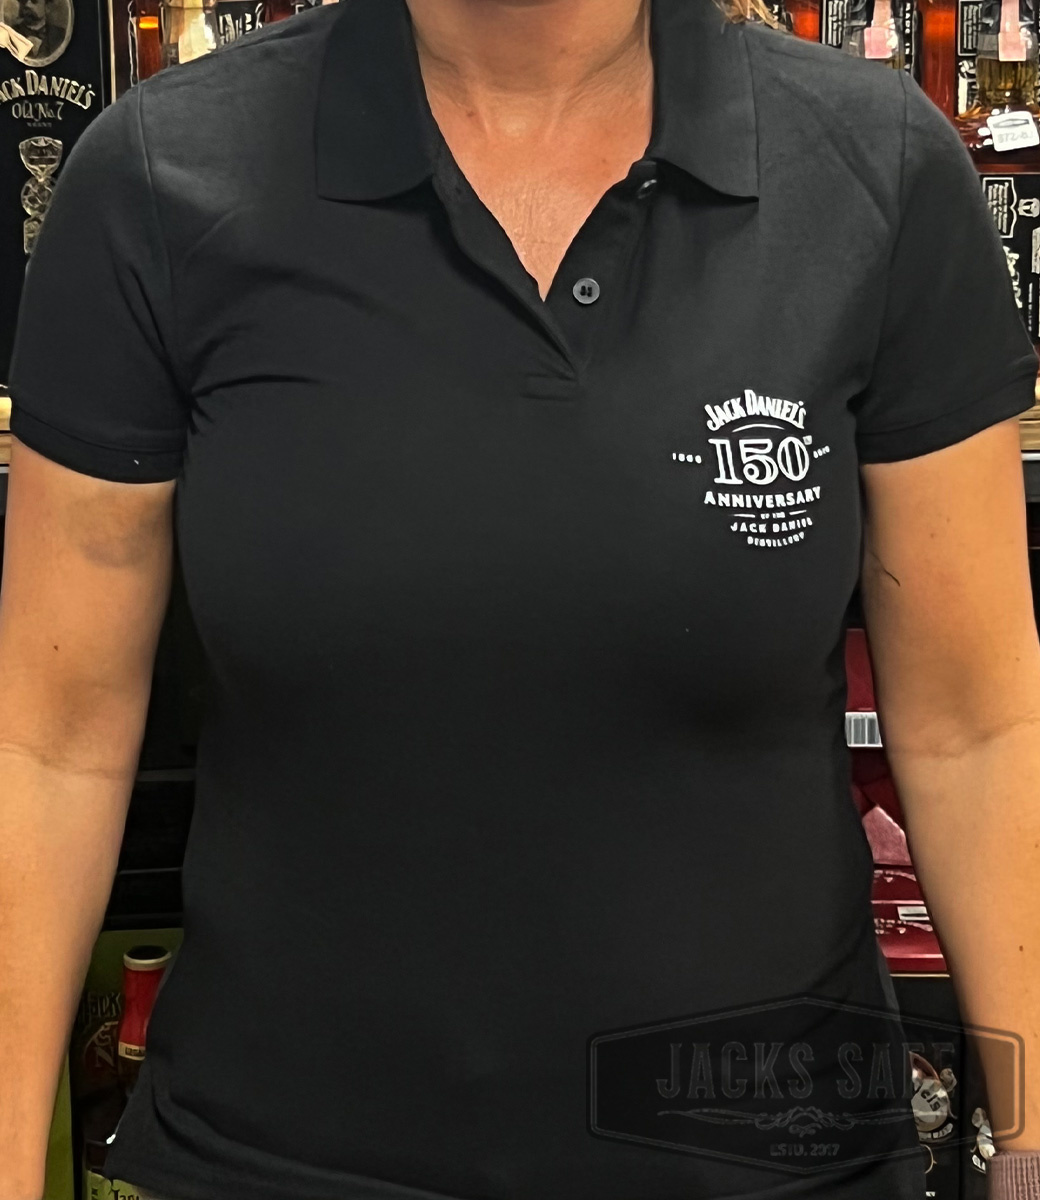 JACK DANIEL'S - Promo Items - 150th Anniversary - POLO - Lady fit - Size S